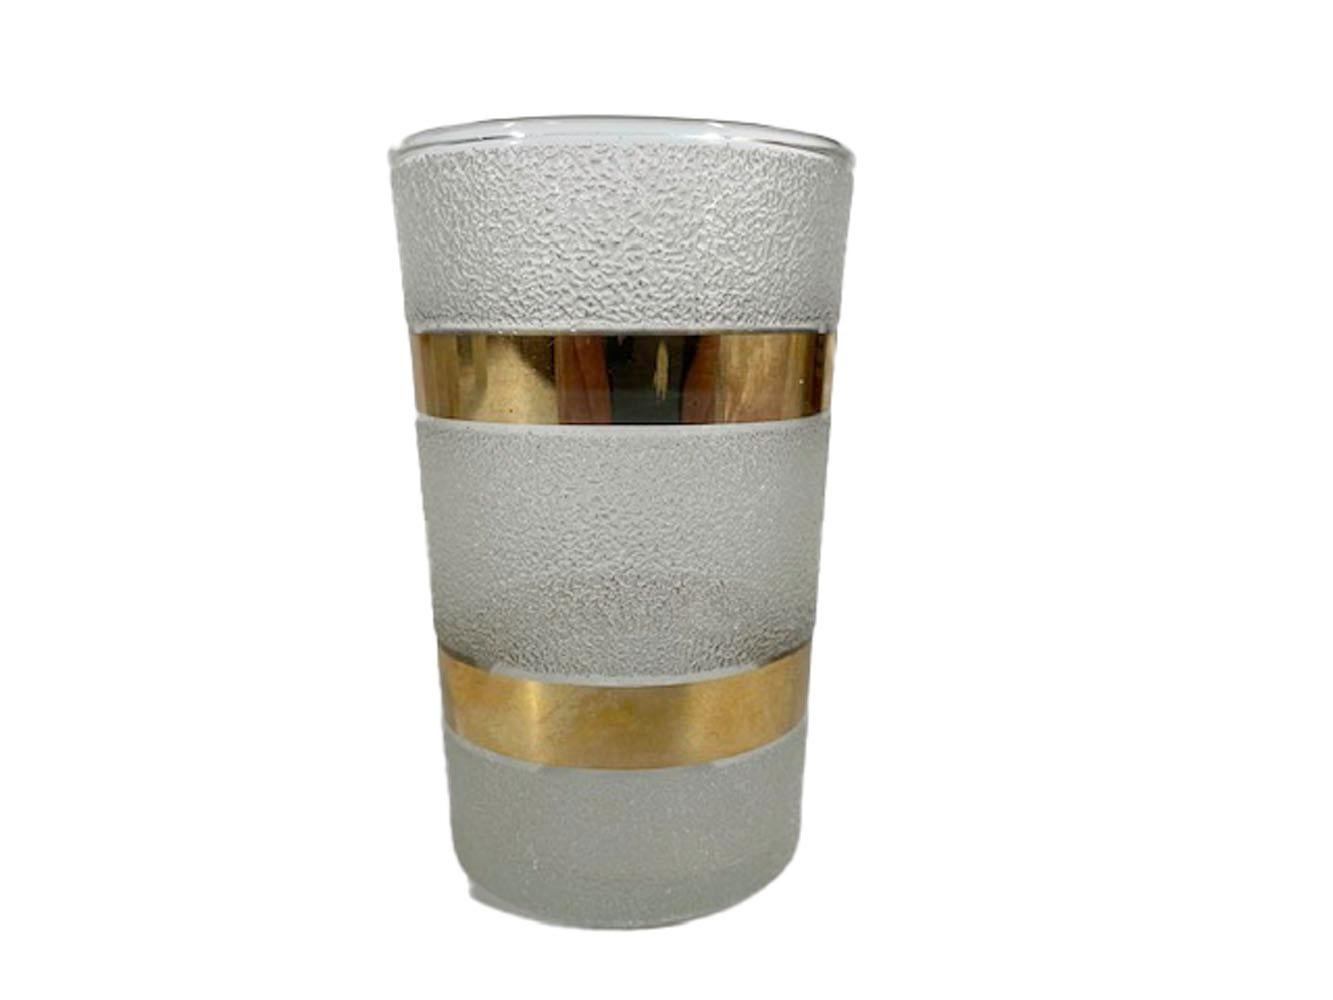 Art Deco cocktail shaker and four cocktail glasses having two wide bands of 22k gold on a textured frosted ground. Most likely Macbeth-Evans after it was acquired by and operated as a division of Corning Glass.